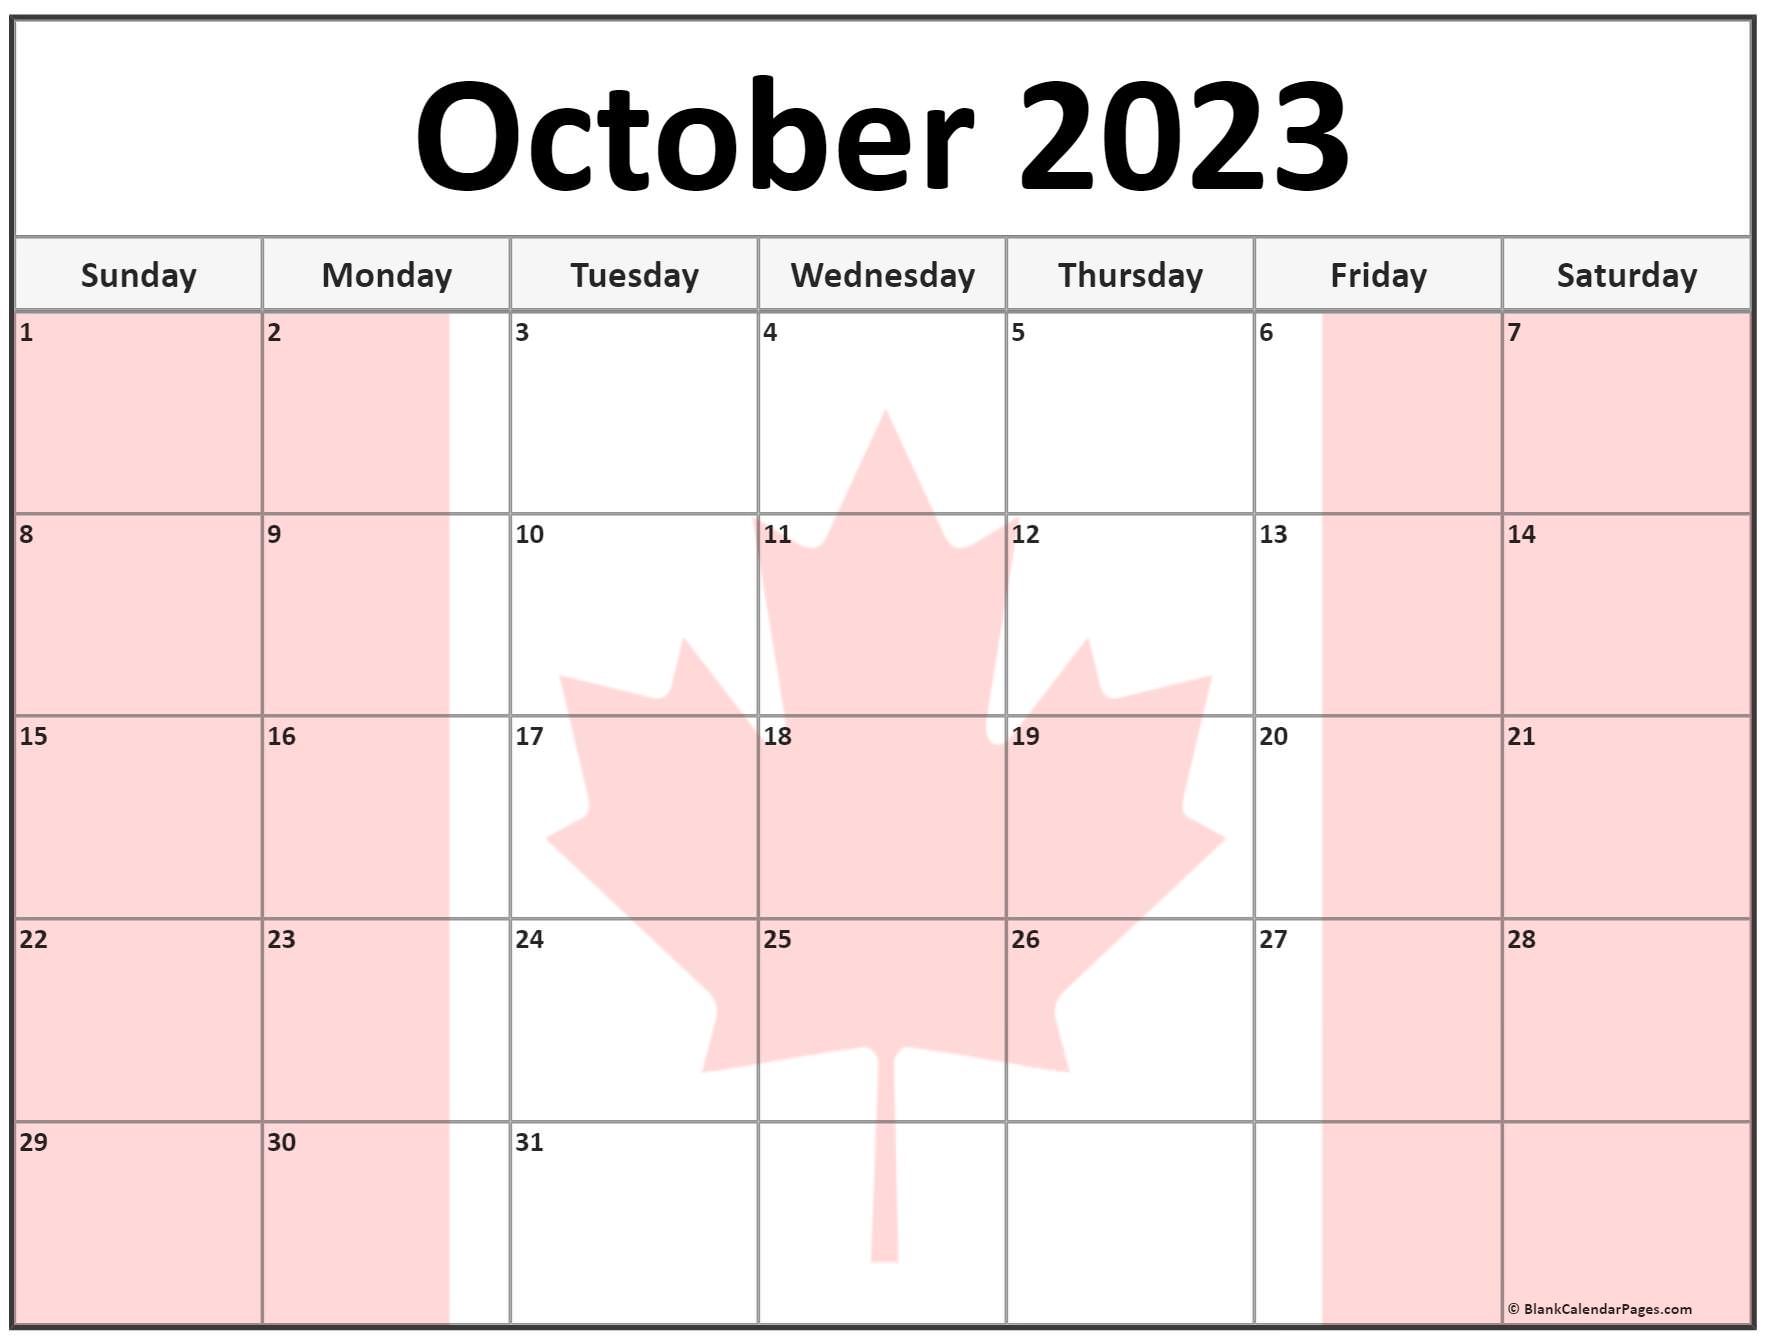 a-calendar-with-autumn-leaves-and-pumpkins-on-it